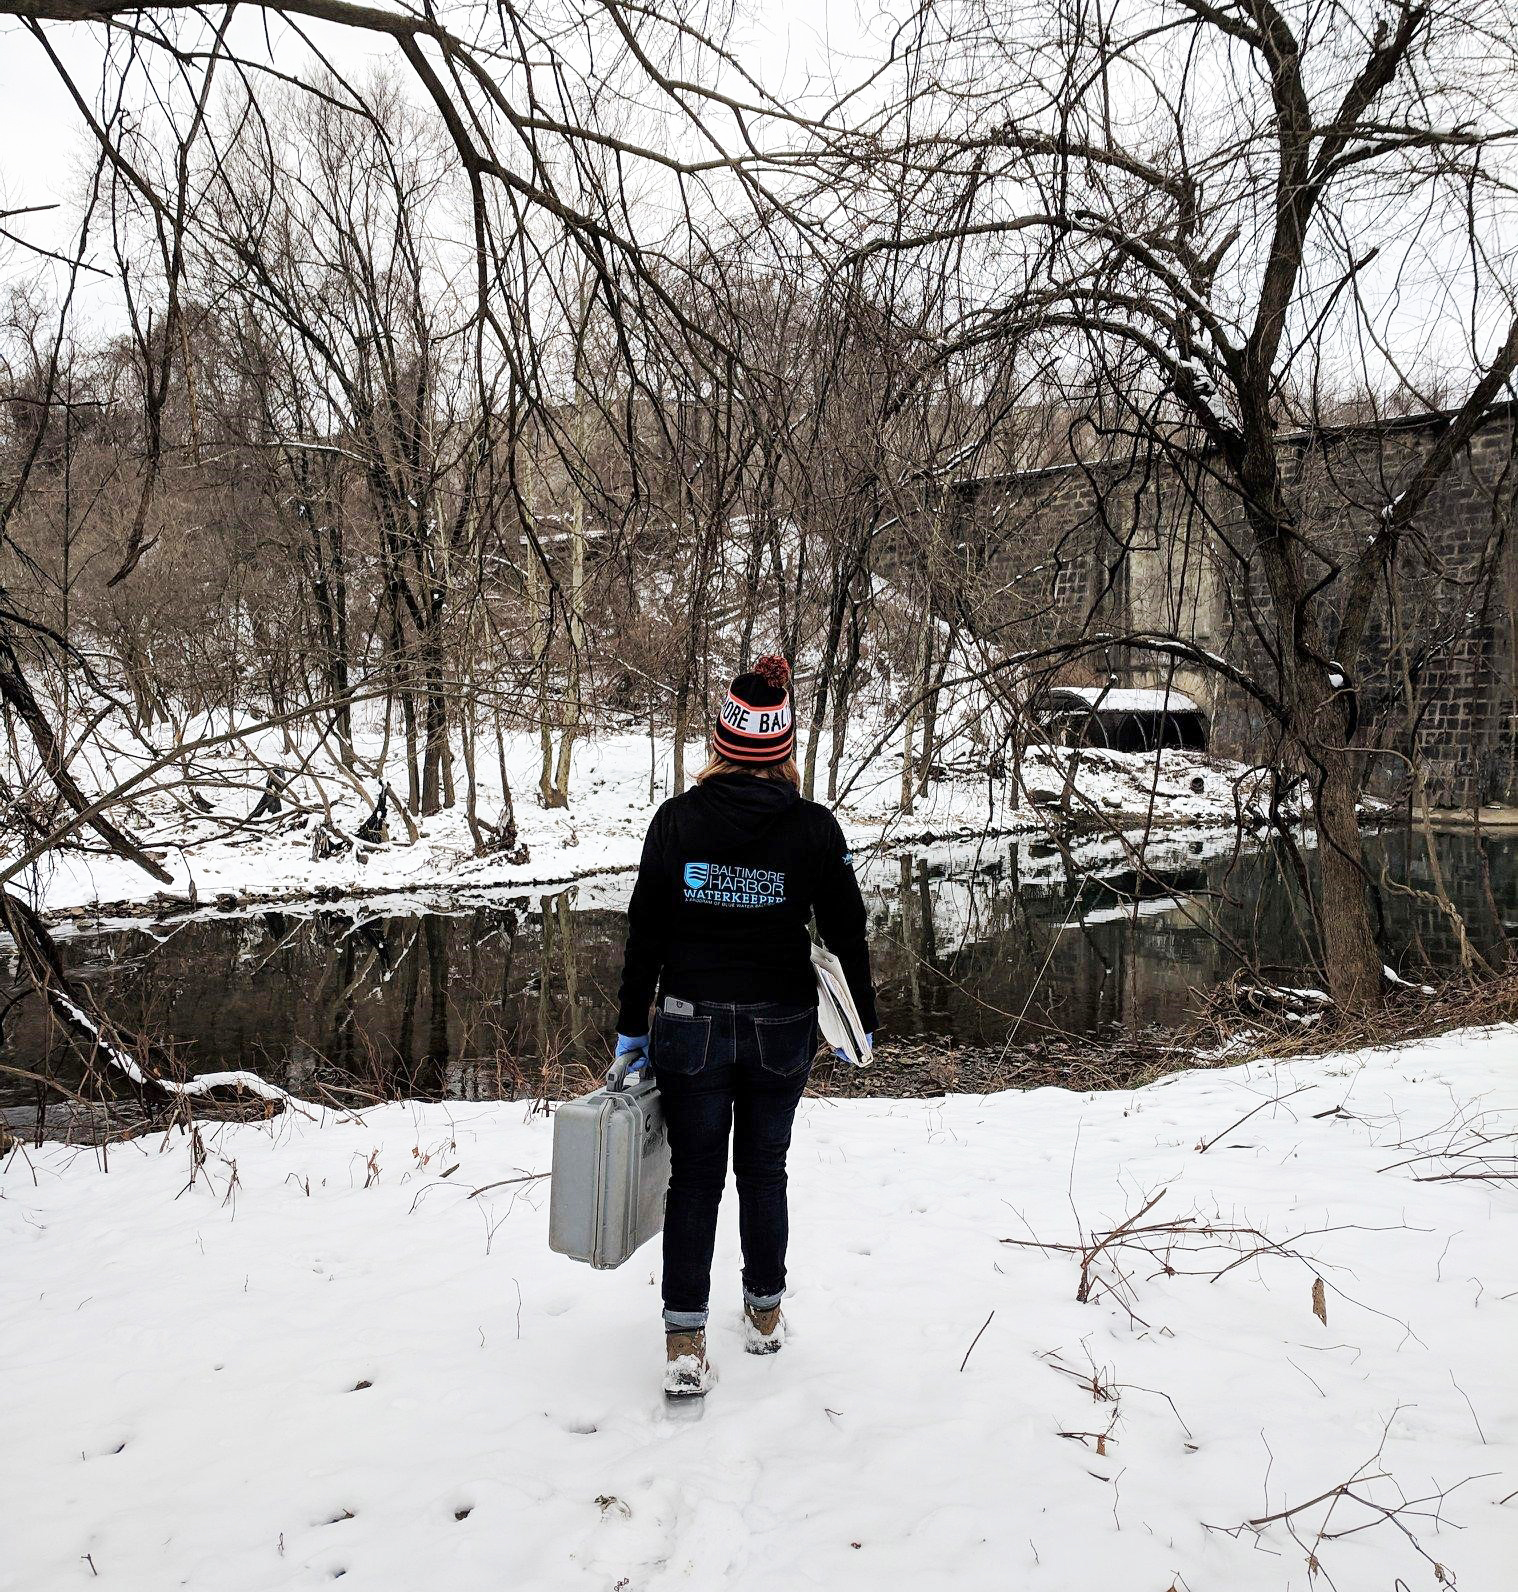 a person walking in the snow carrying a suitcase